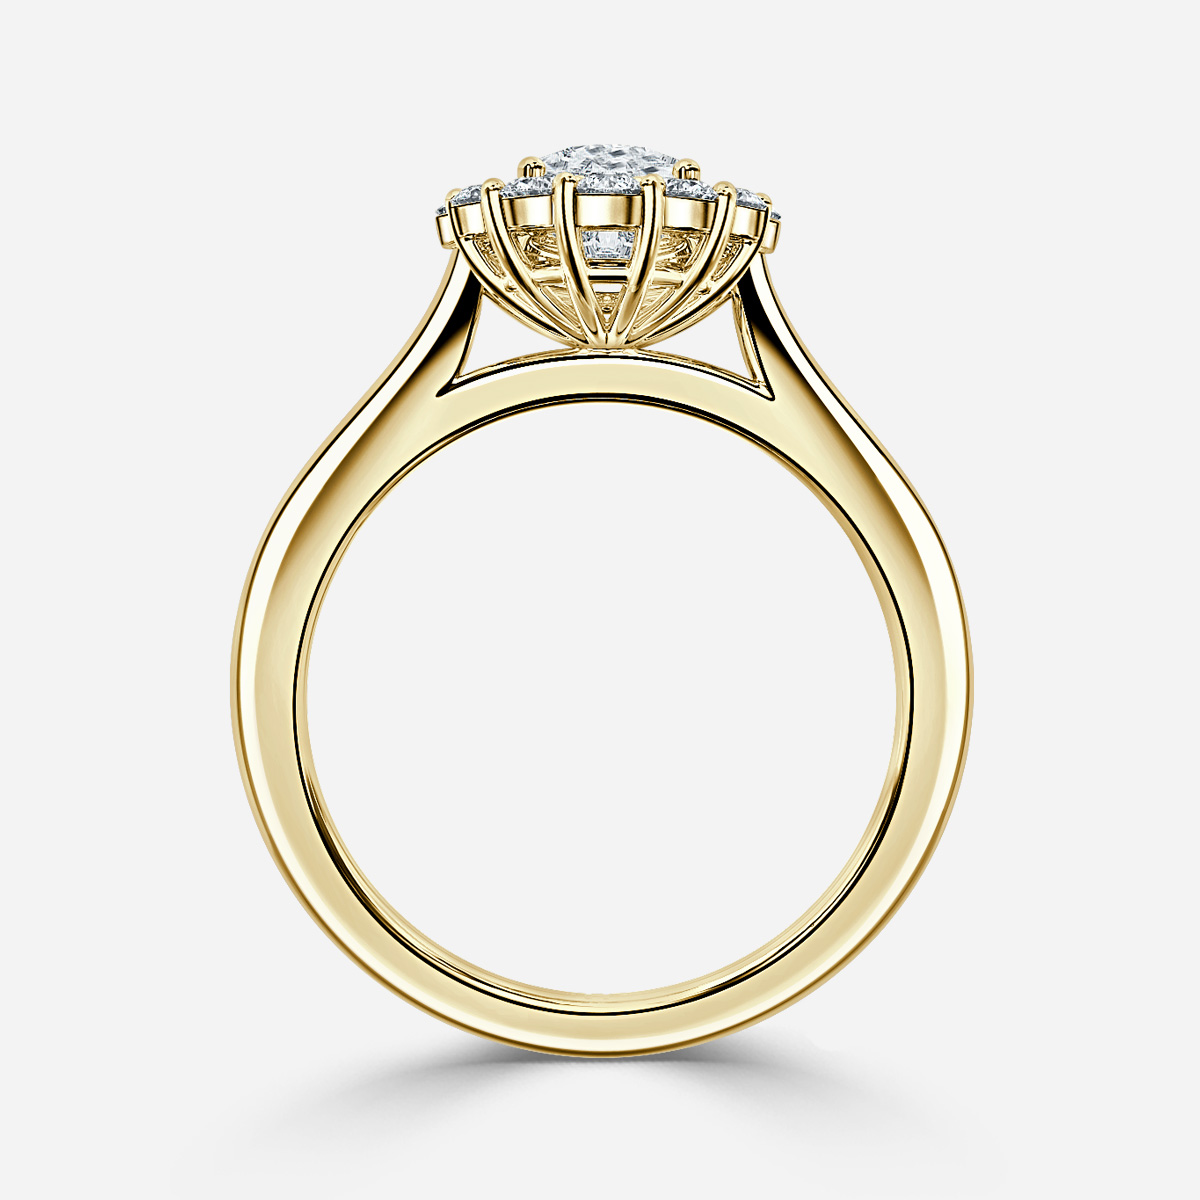 Marisol Yellow Gold Cluster Engagement Ring